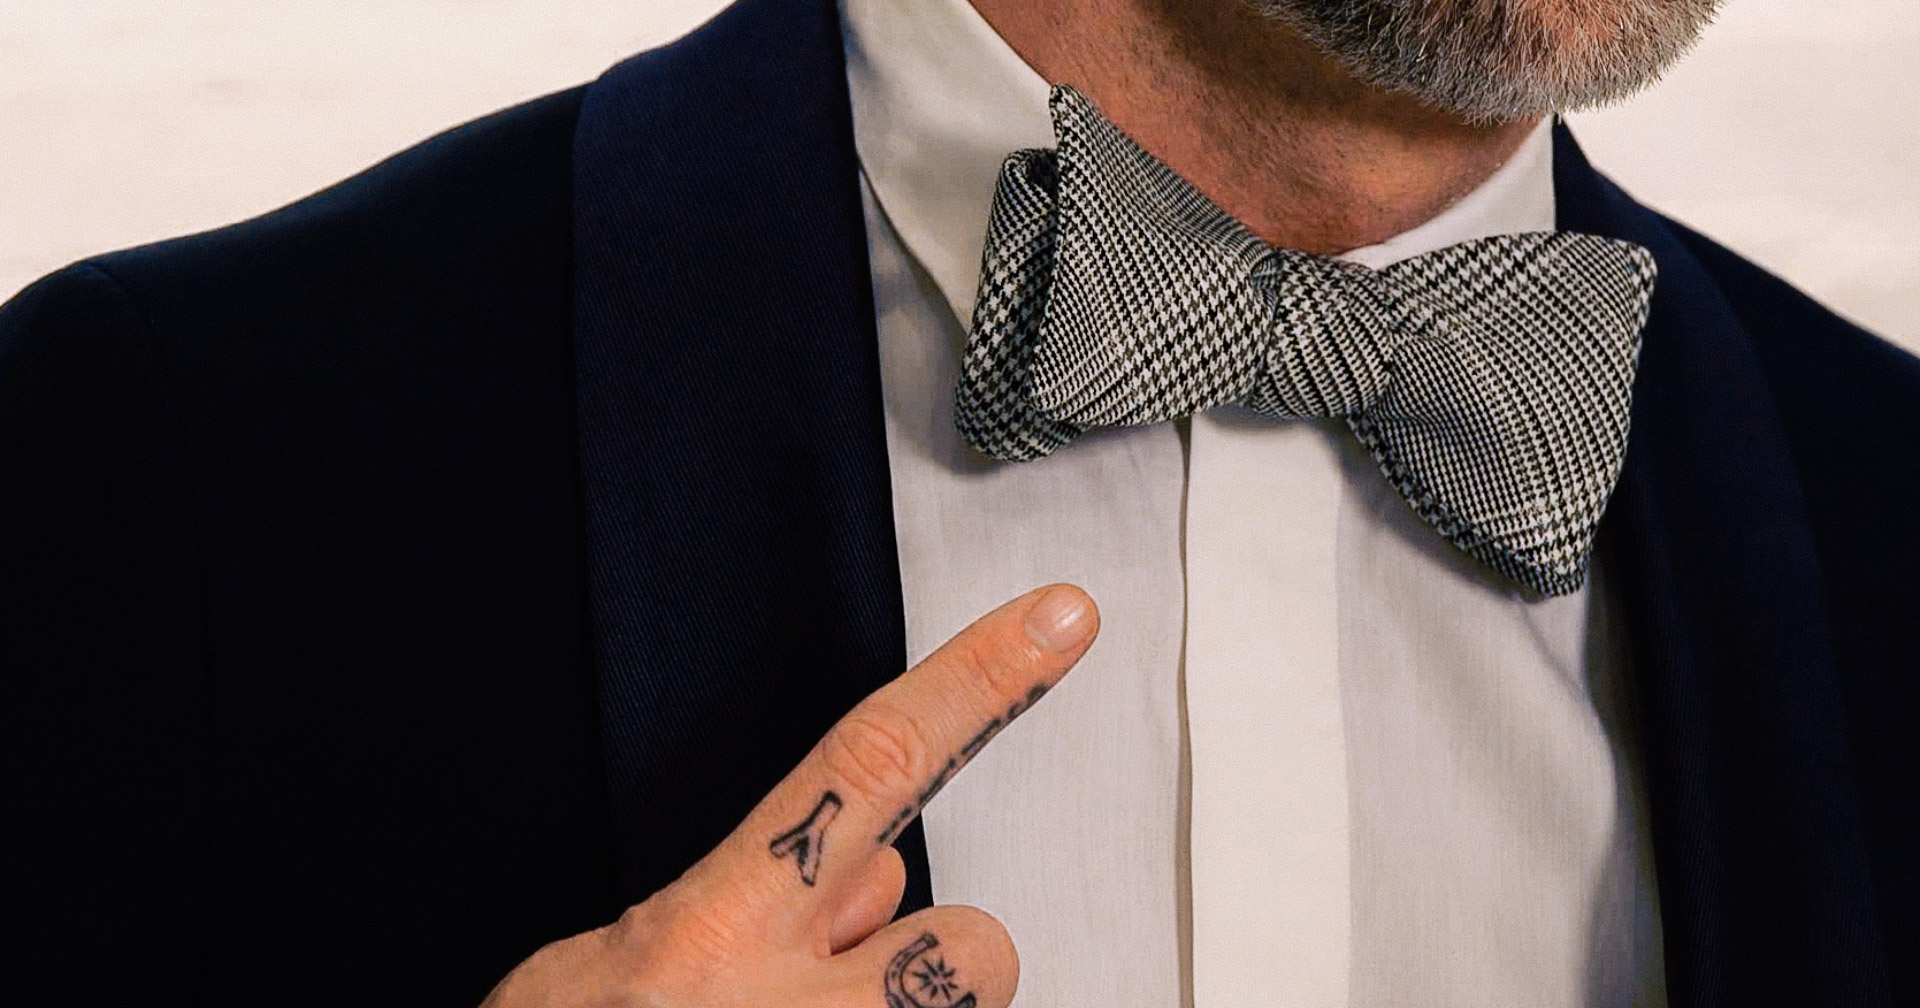 Style Files: How to Rock a Tuxedo